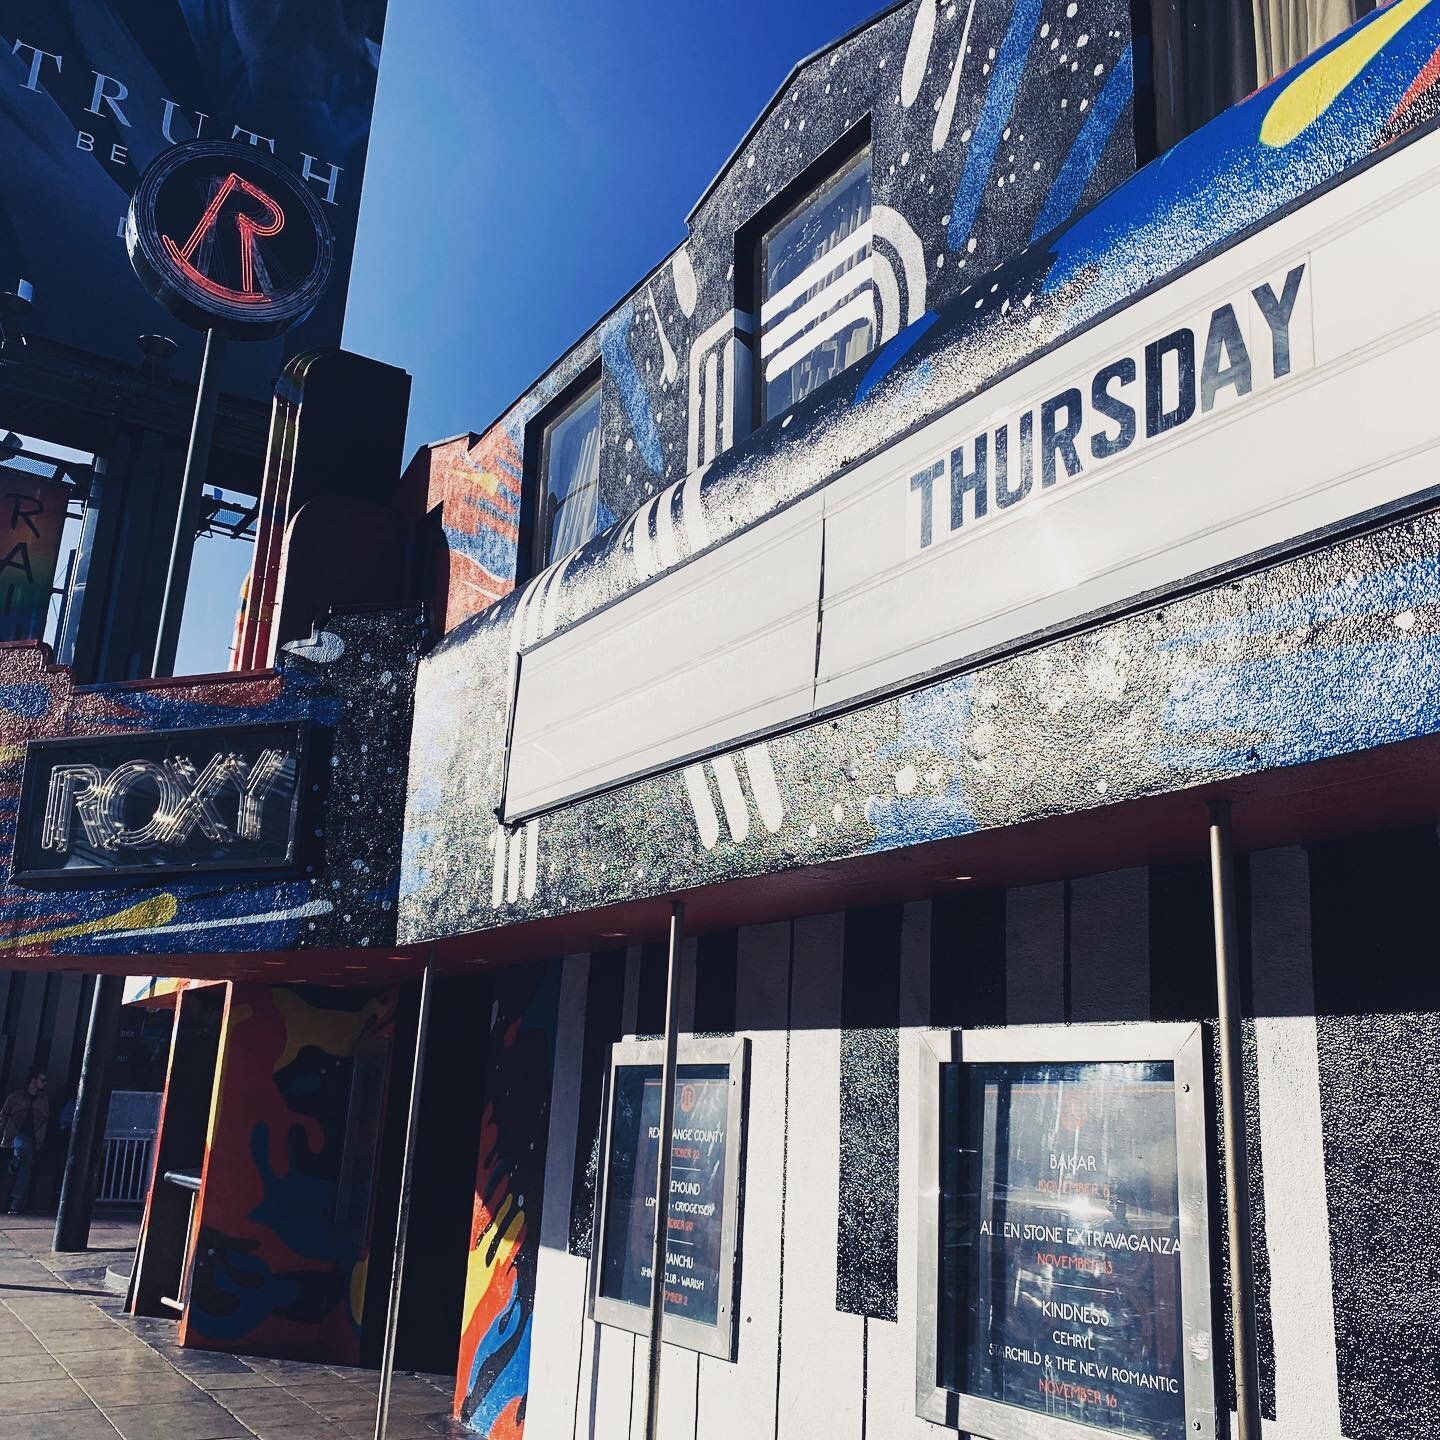 With @thursdayband playing the Roxy in my old home town tonight! See you at the show !